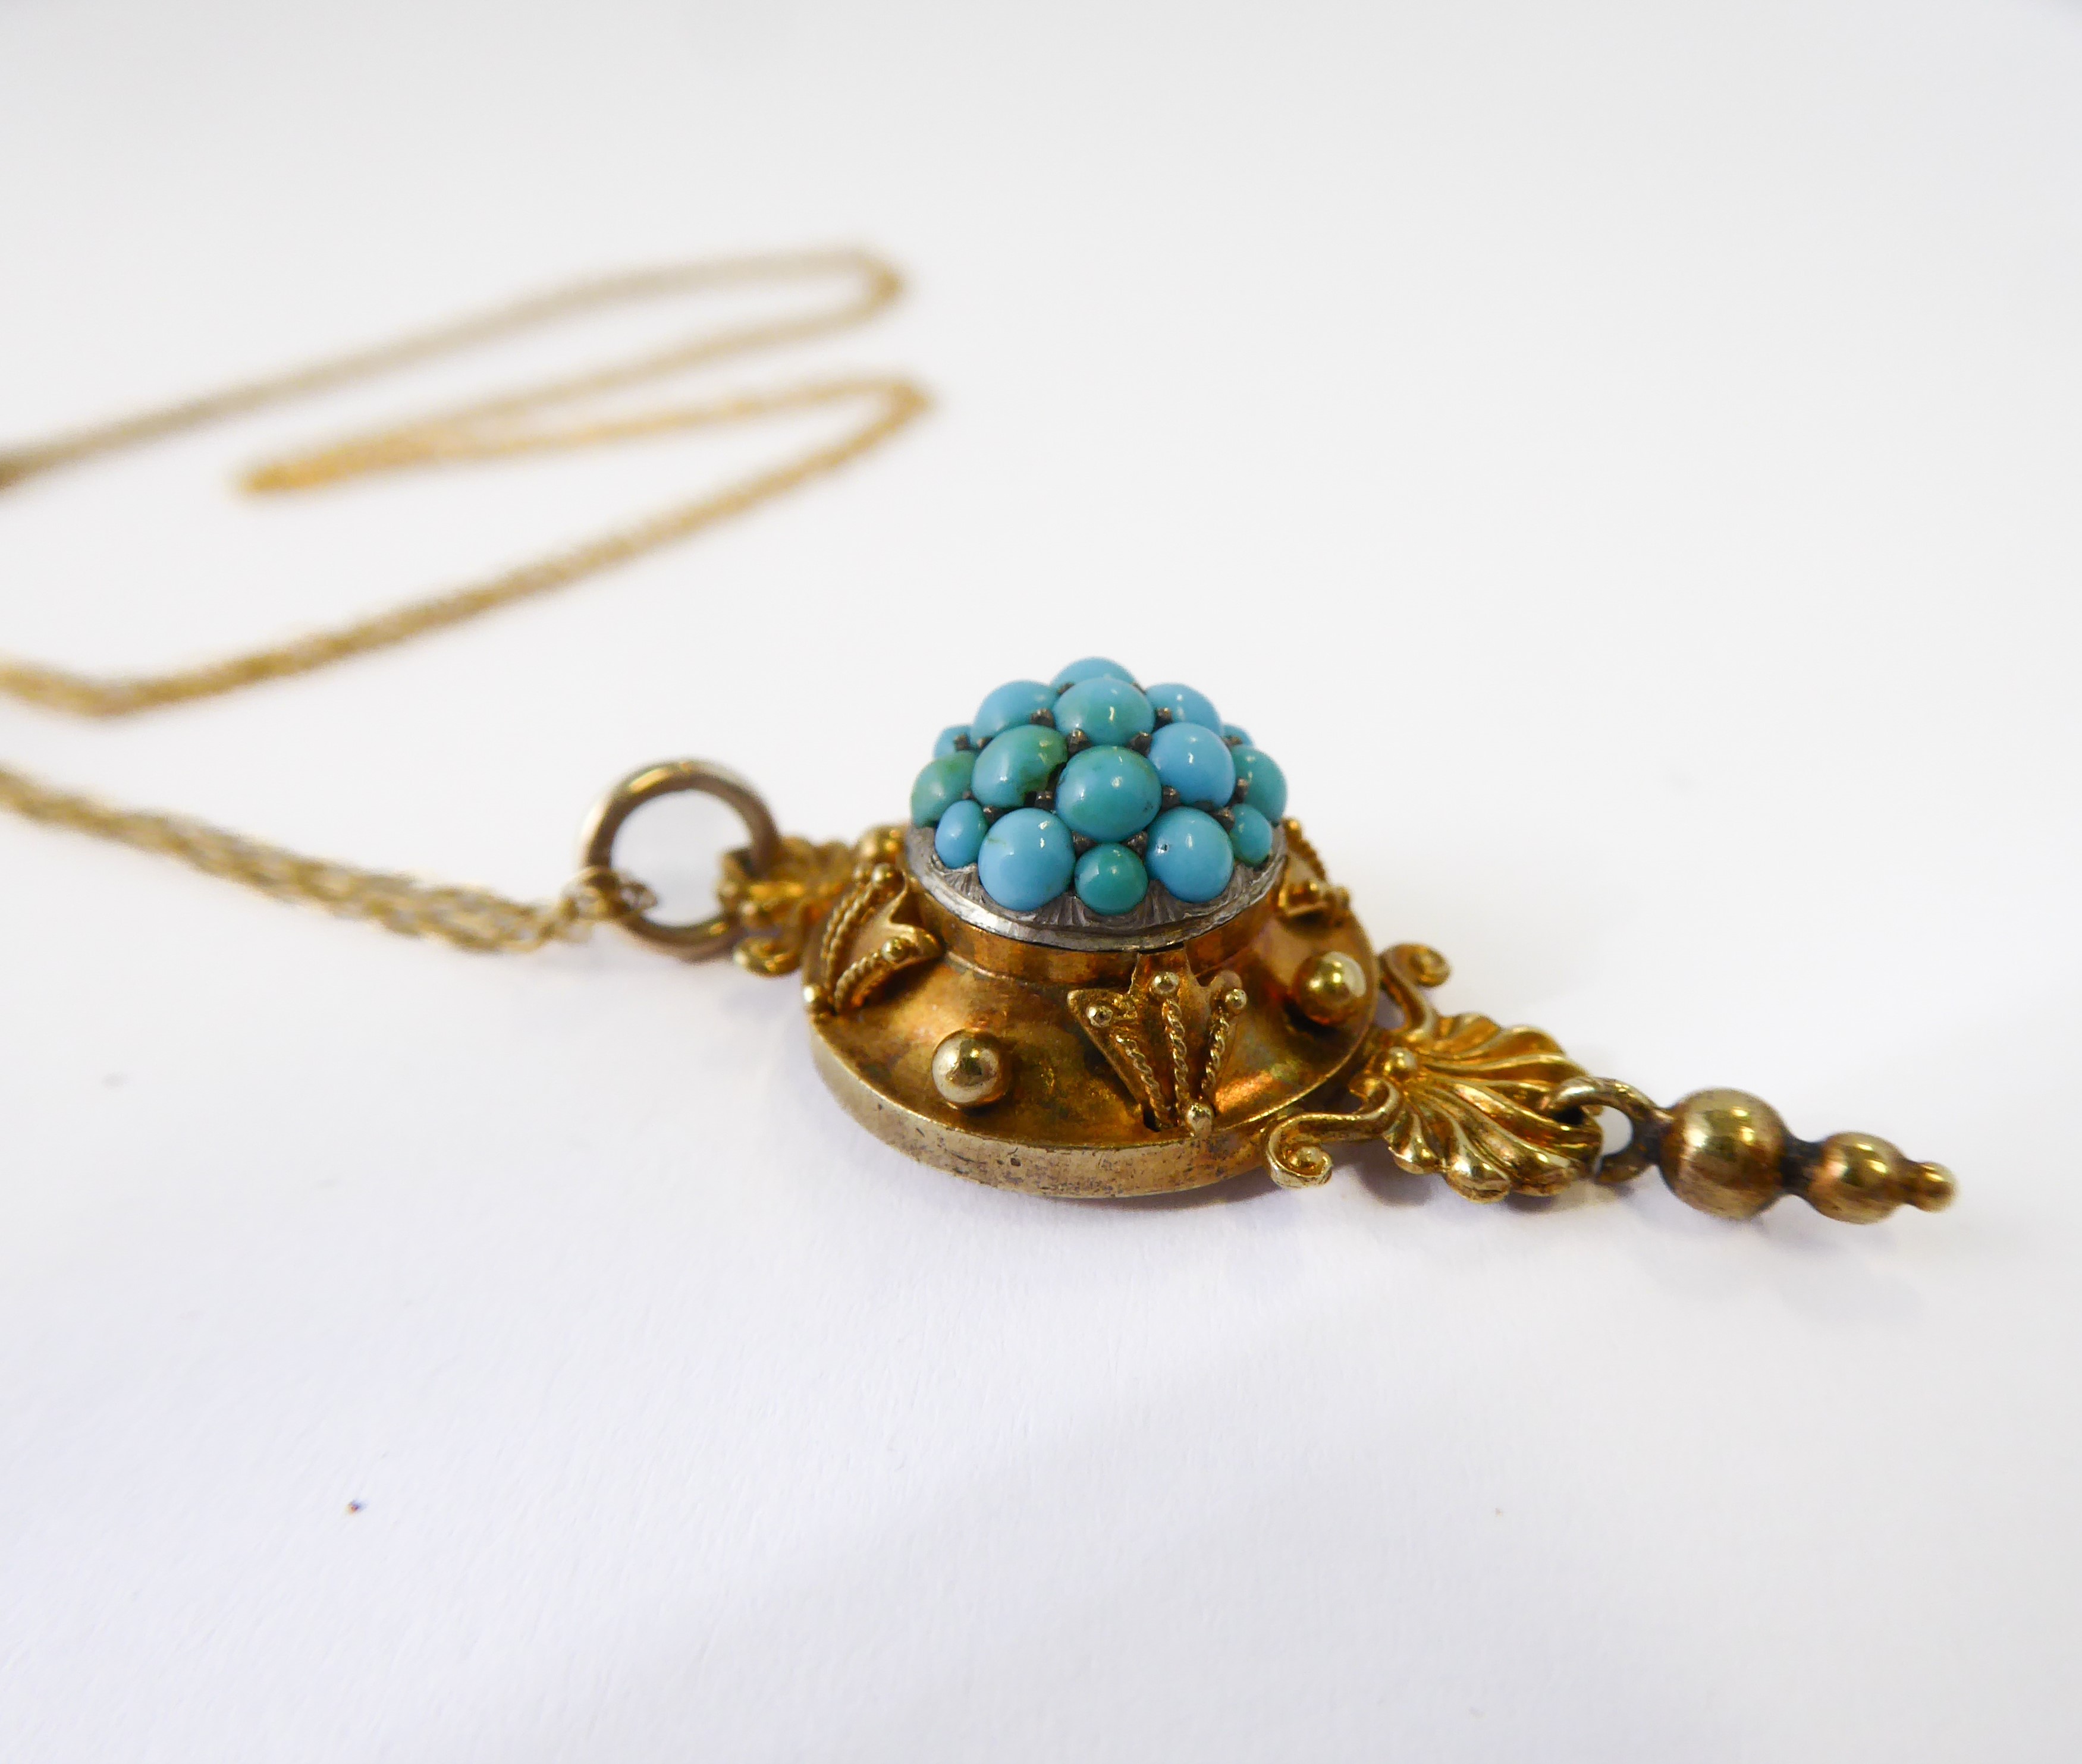 A Victorian gold and turquoise pendant and chain - Image 3 of 3